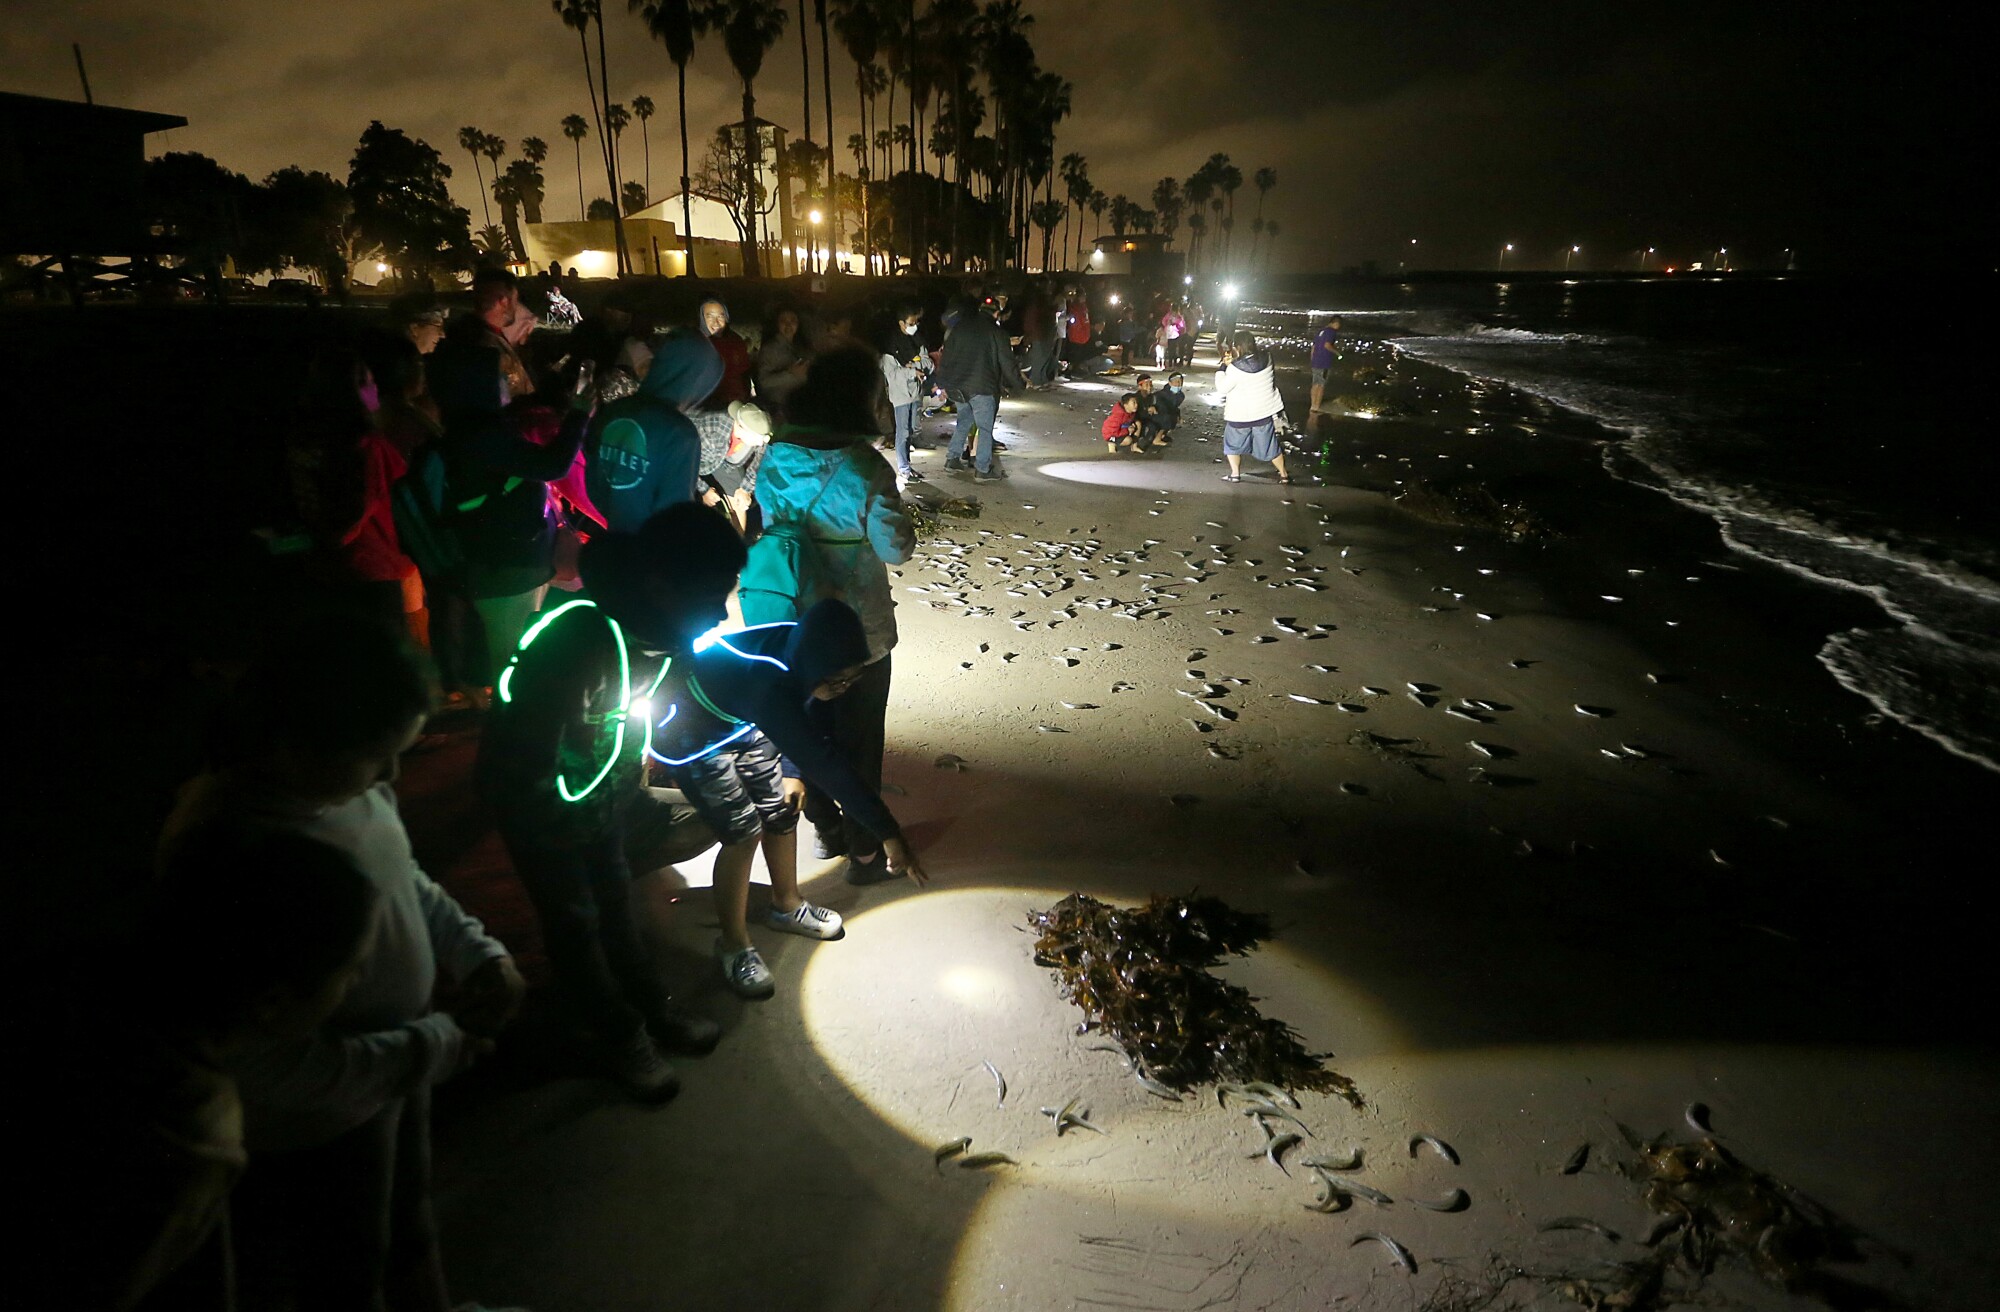 People light up with flashlights on the grunion.